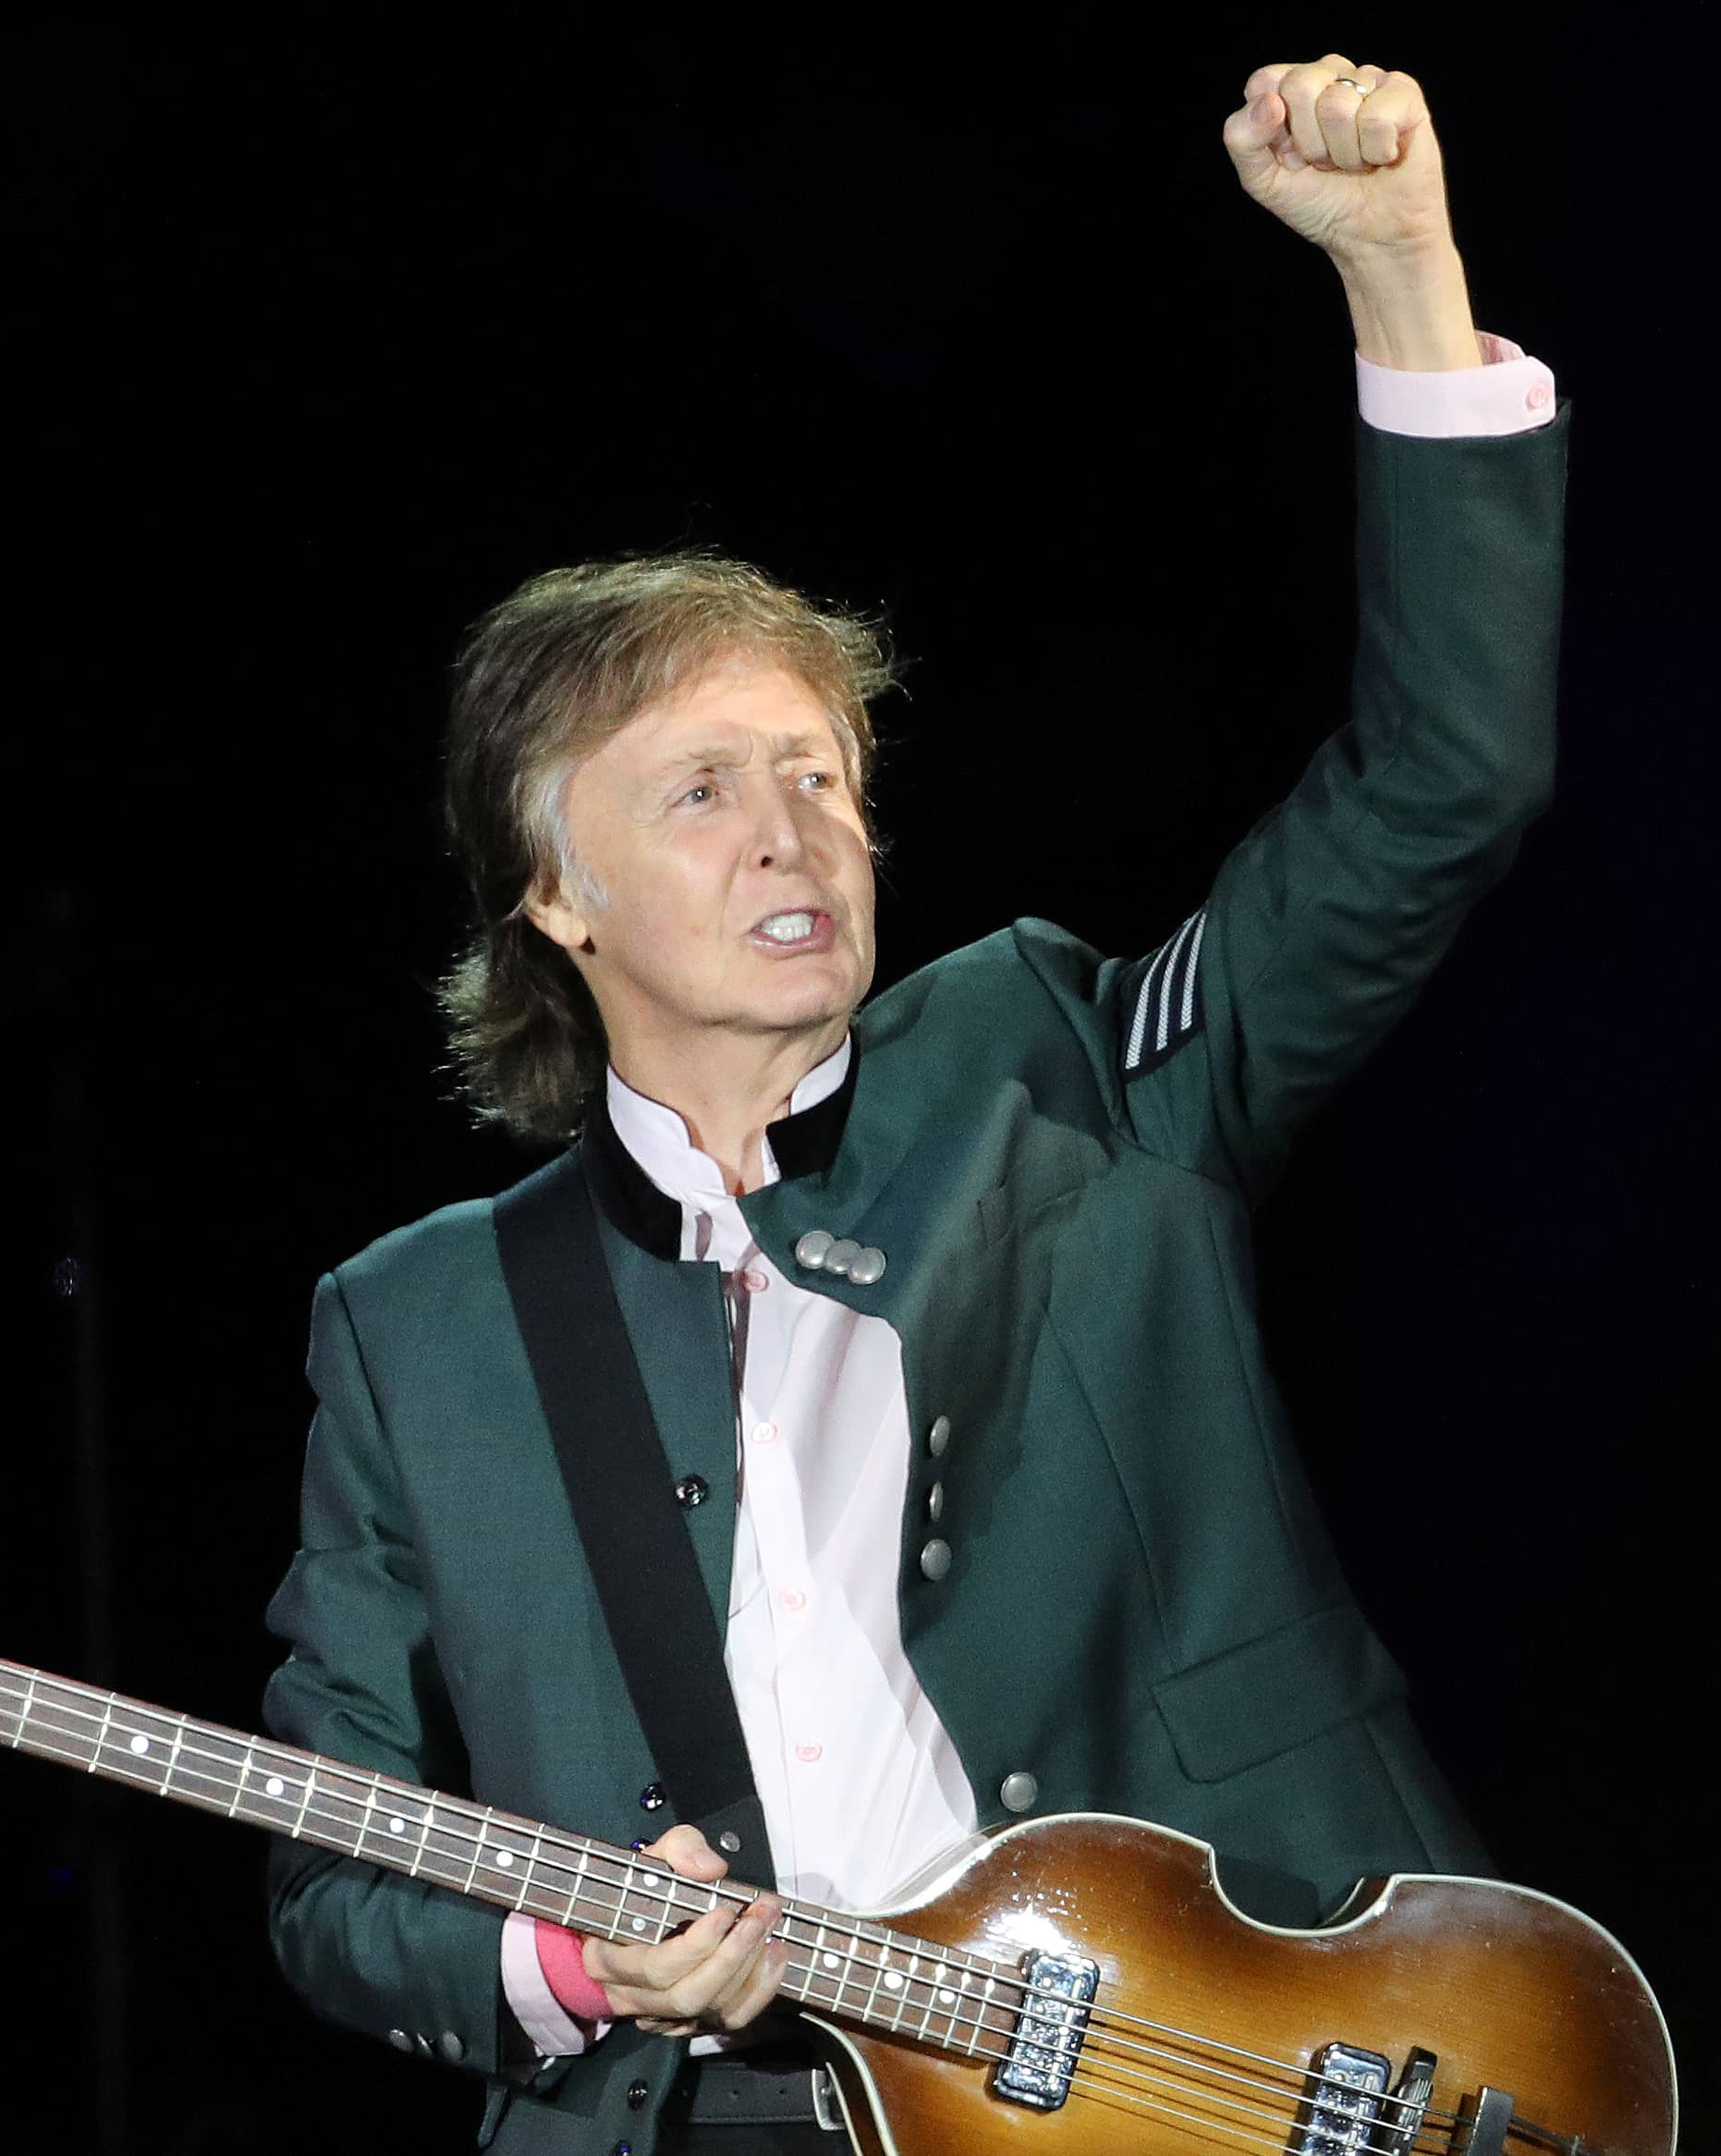 paul-mccartney-performs-during-the-one-on-one-tour-concert-in-porto-alegre-7